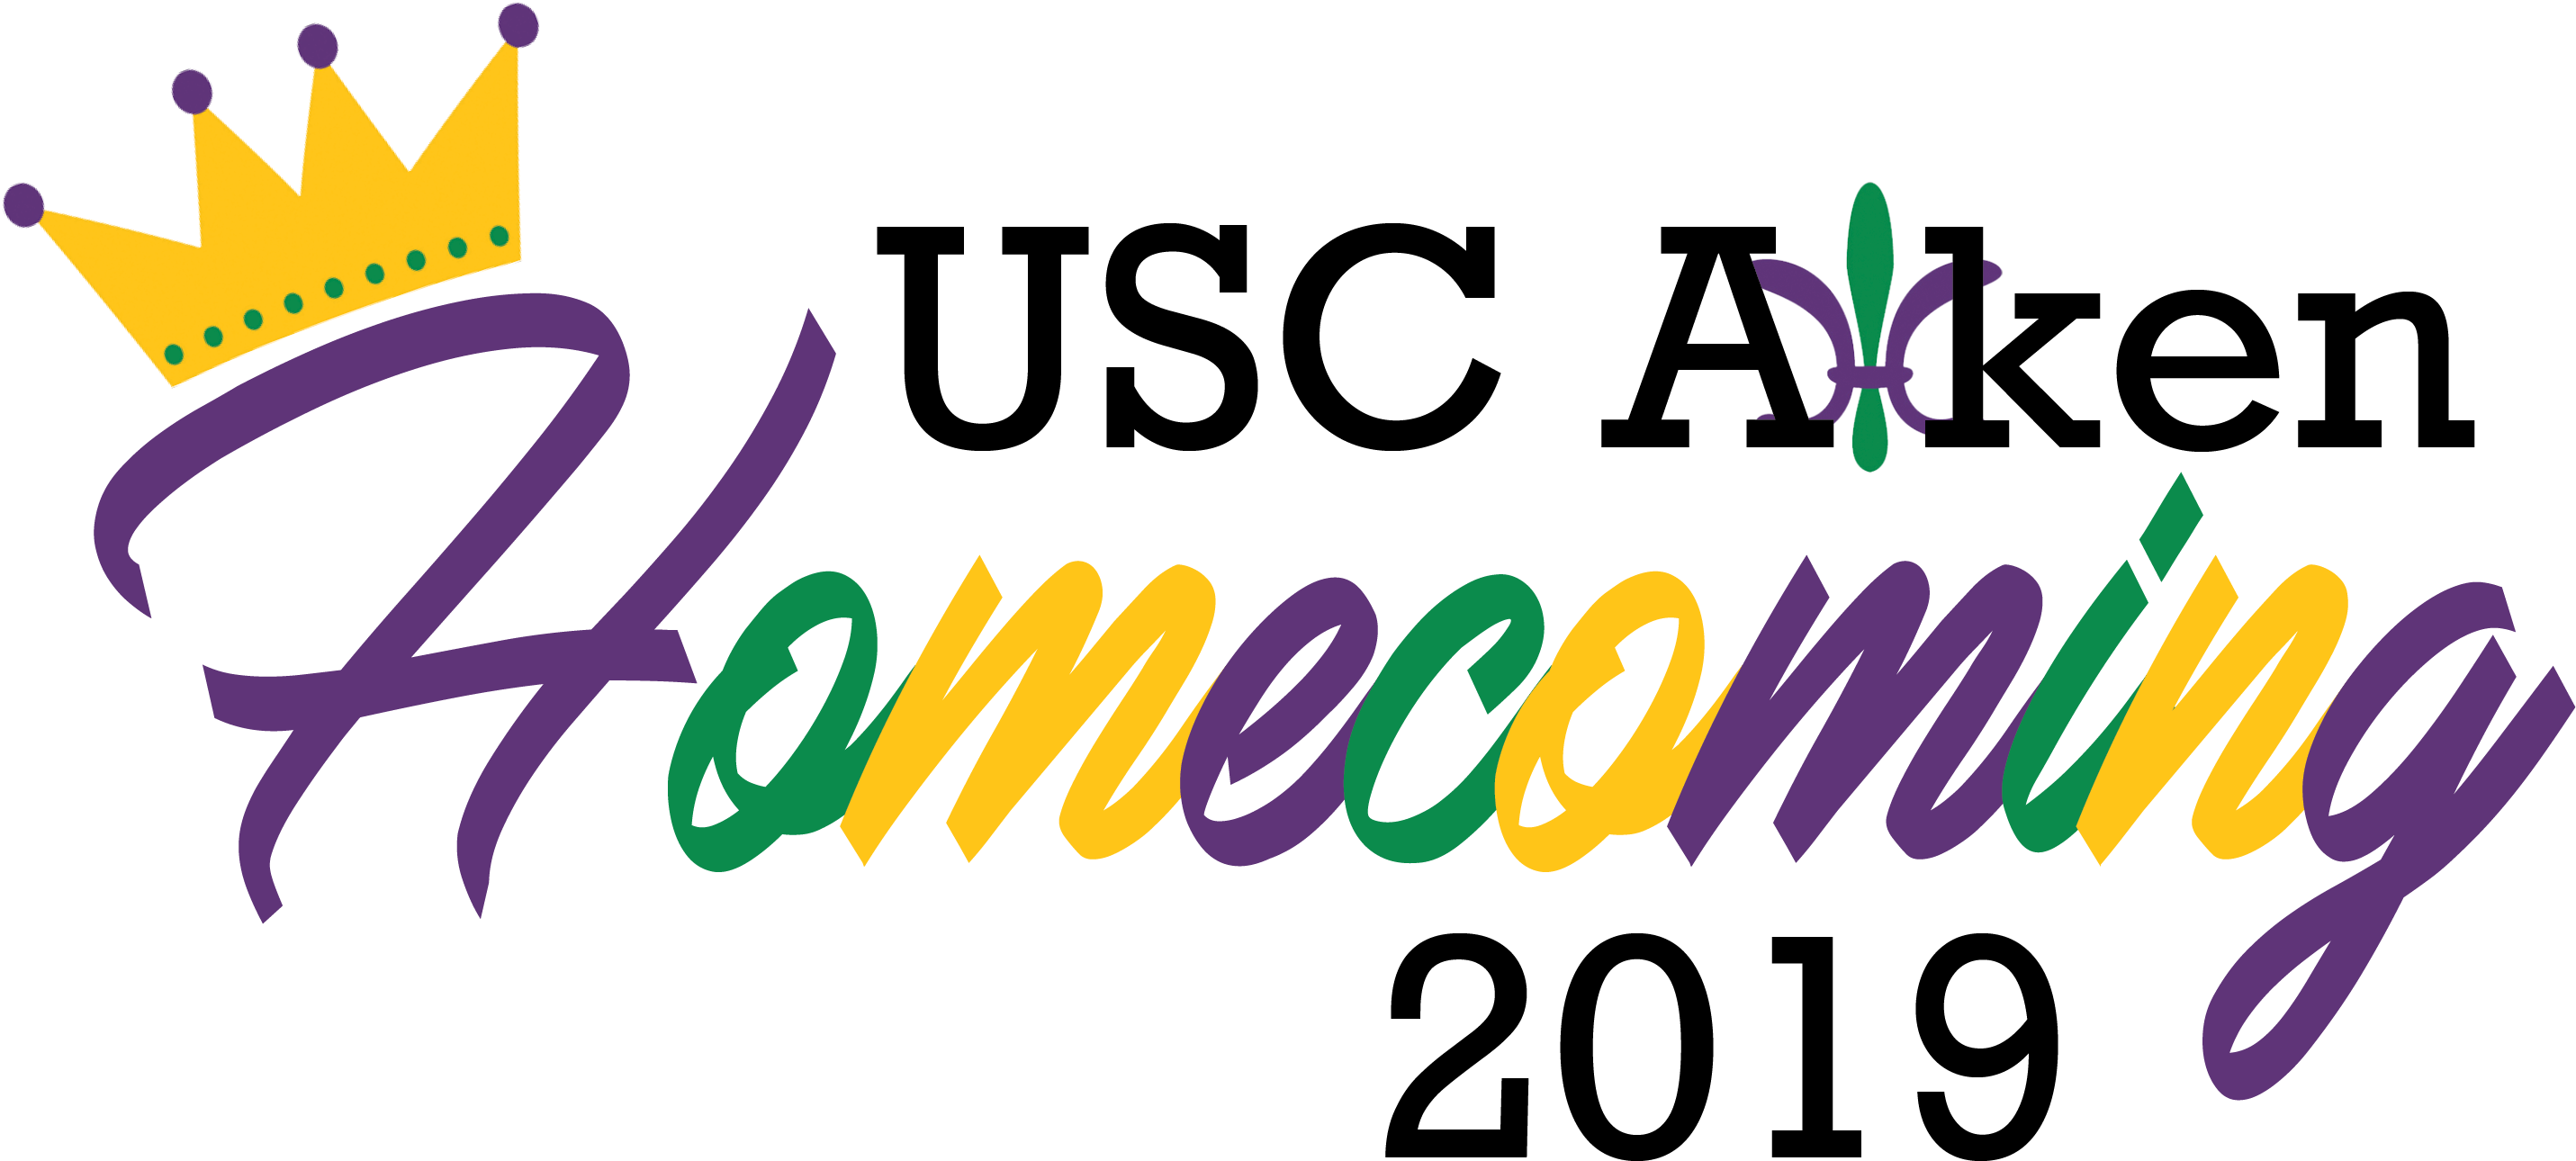 Download Homecoming Logo 2019 Pacer Alumni - Graphic Design PNG Image with  No Background 